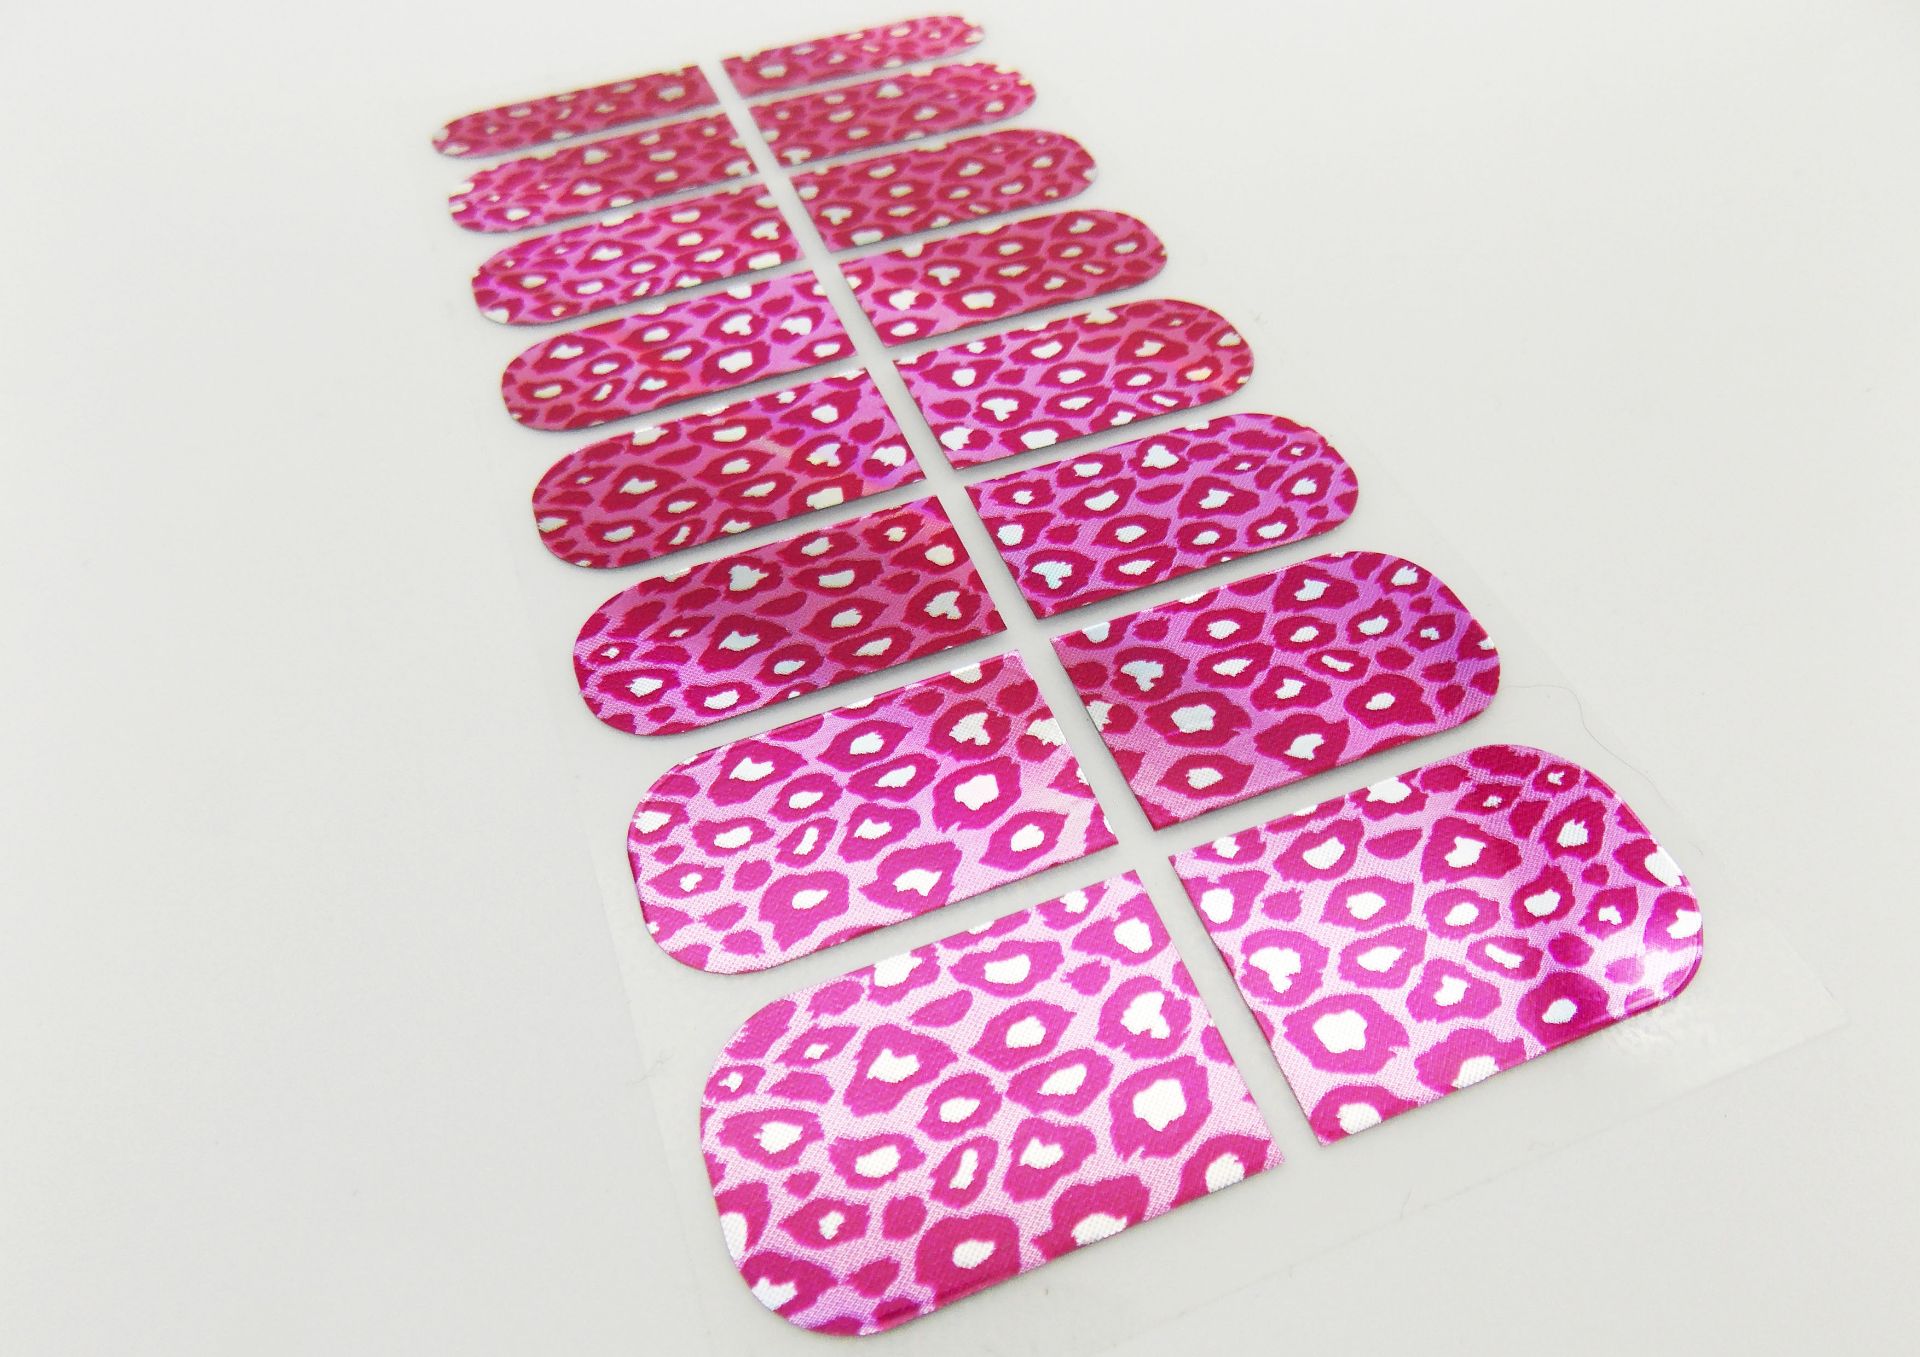 144 Packs Of Professional Nail Art Wrap Transfers - 3 Different Animal Print Styles - Image 4 of 9